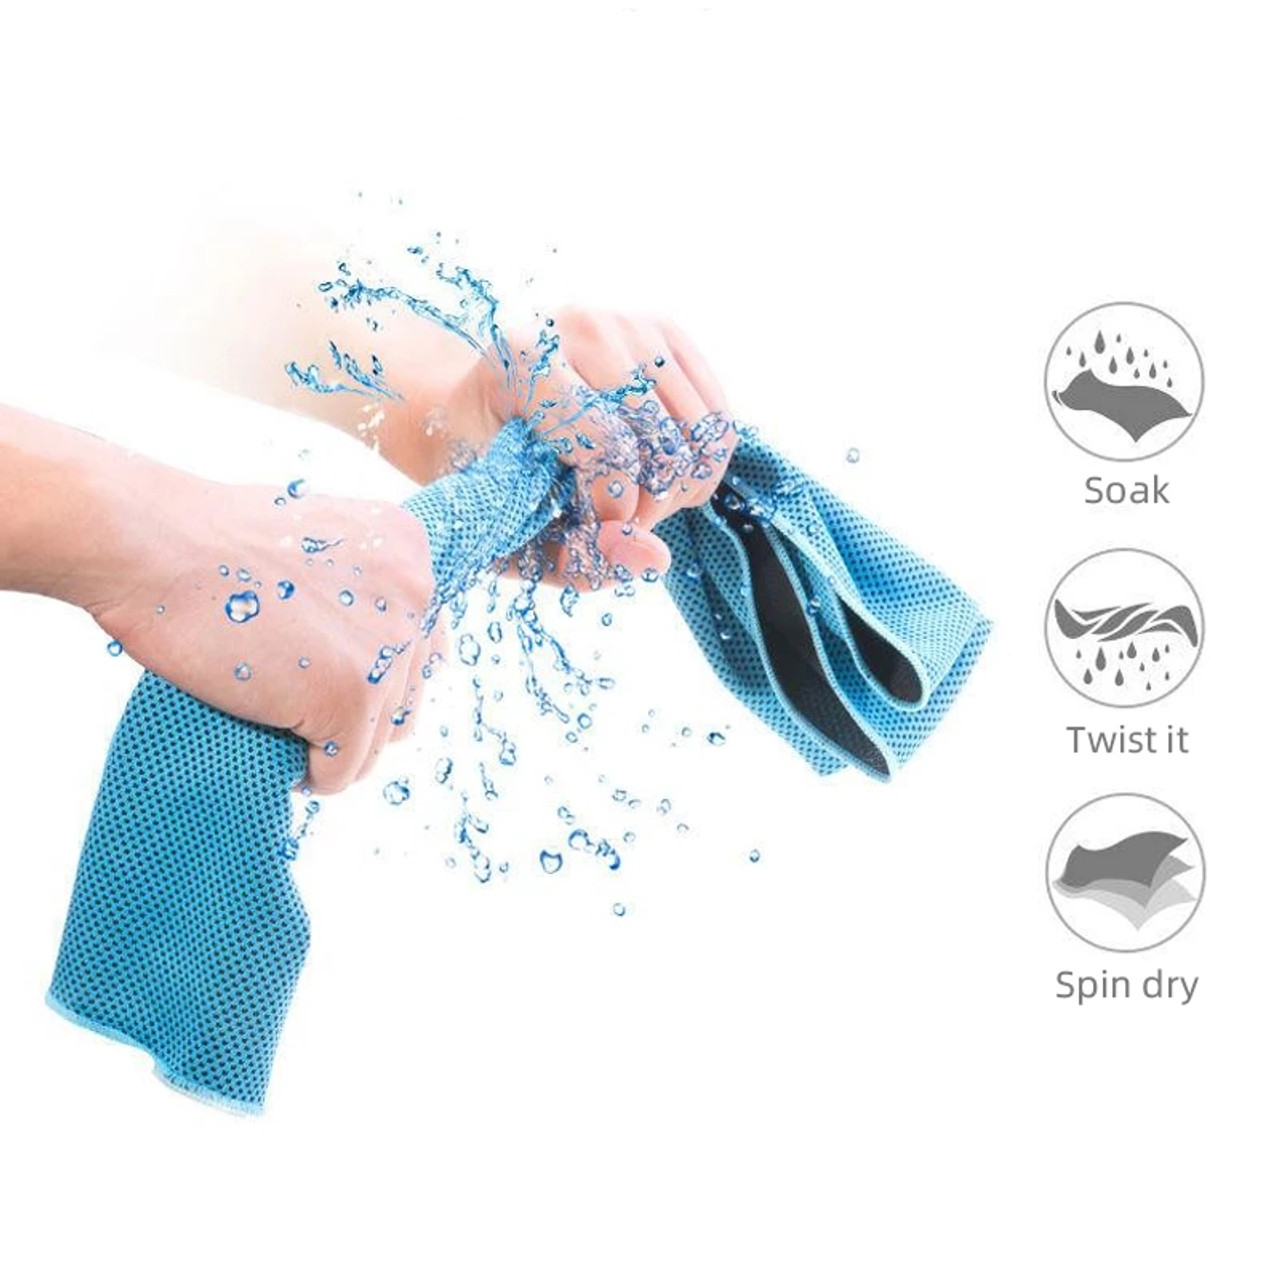 Quick-Dry Cooling Towel Set (3-Pack) product image